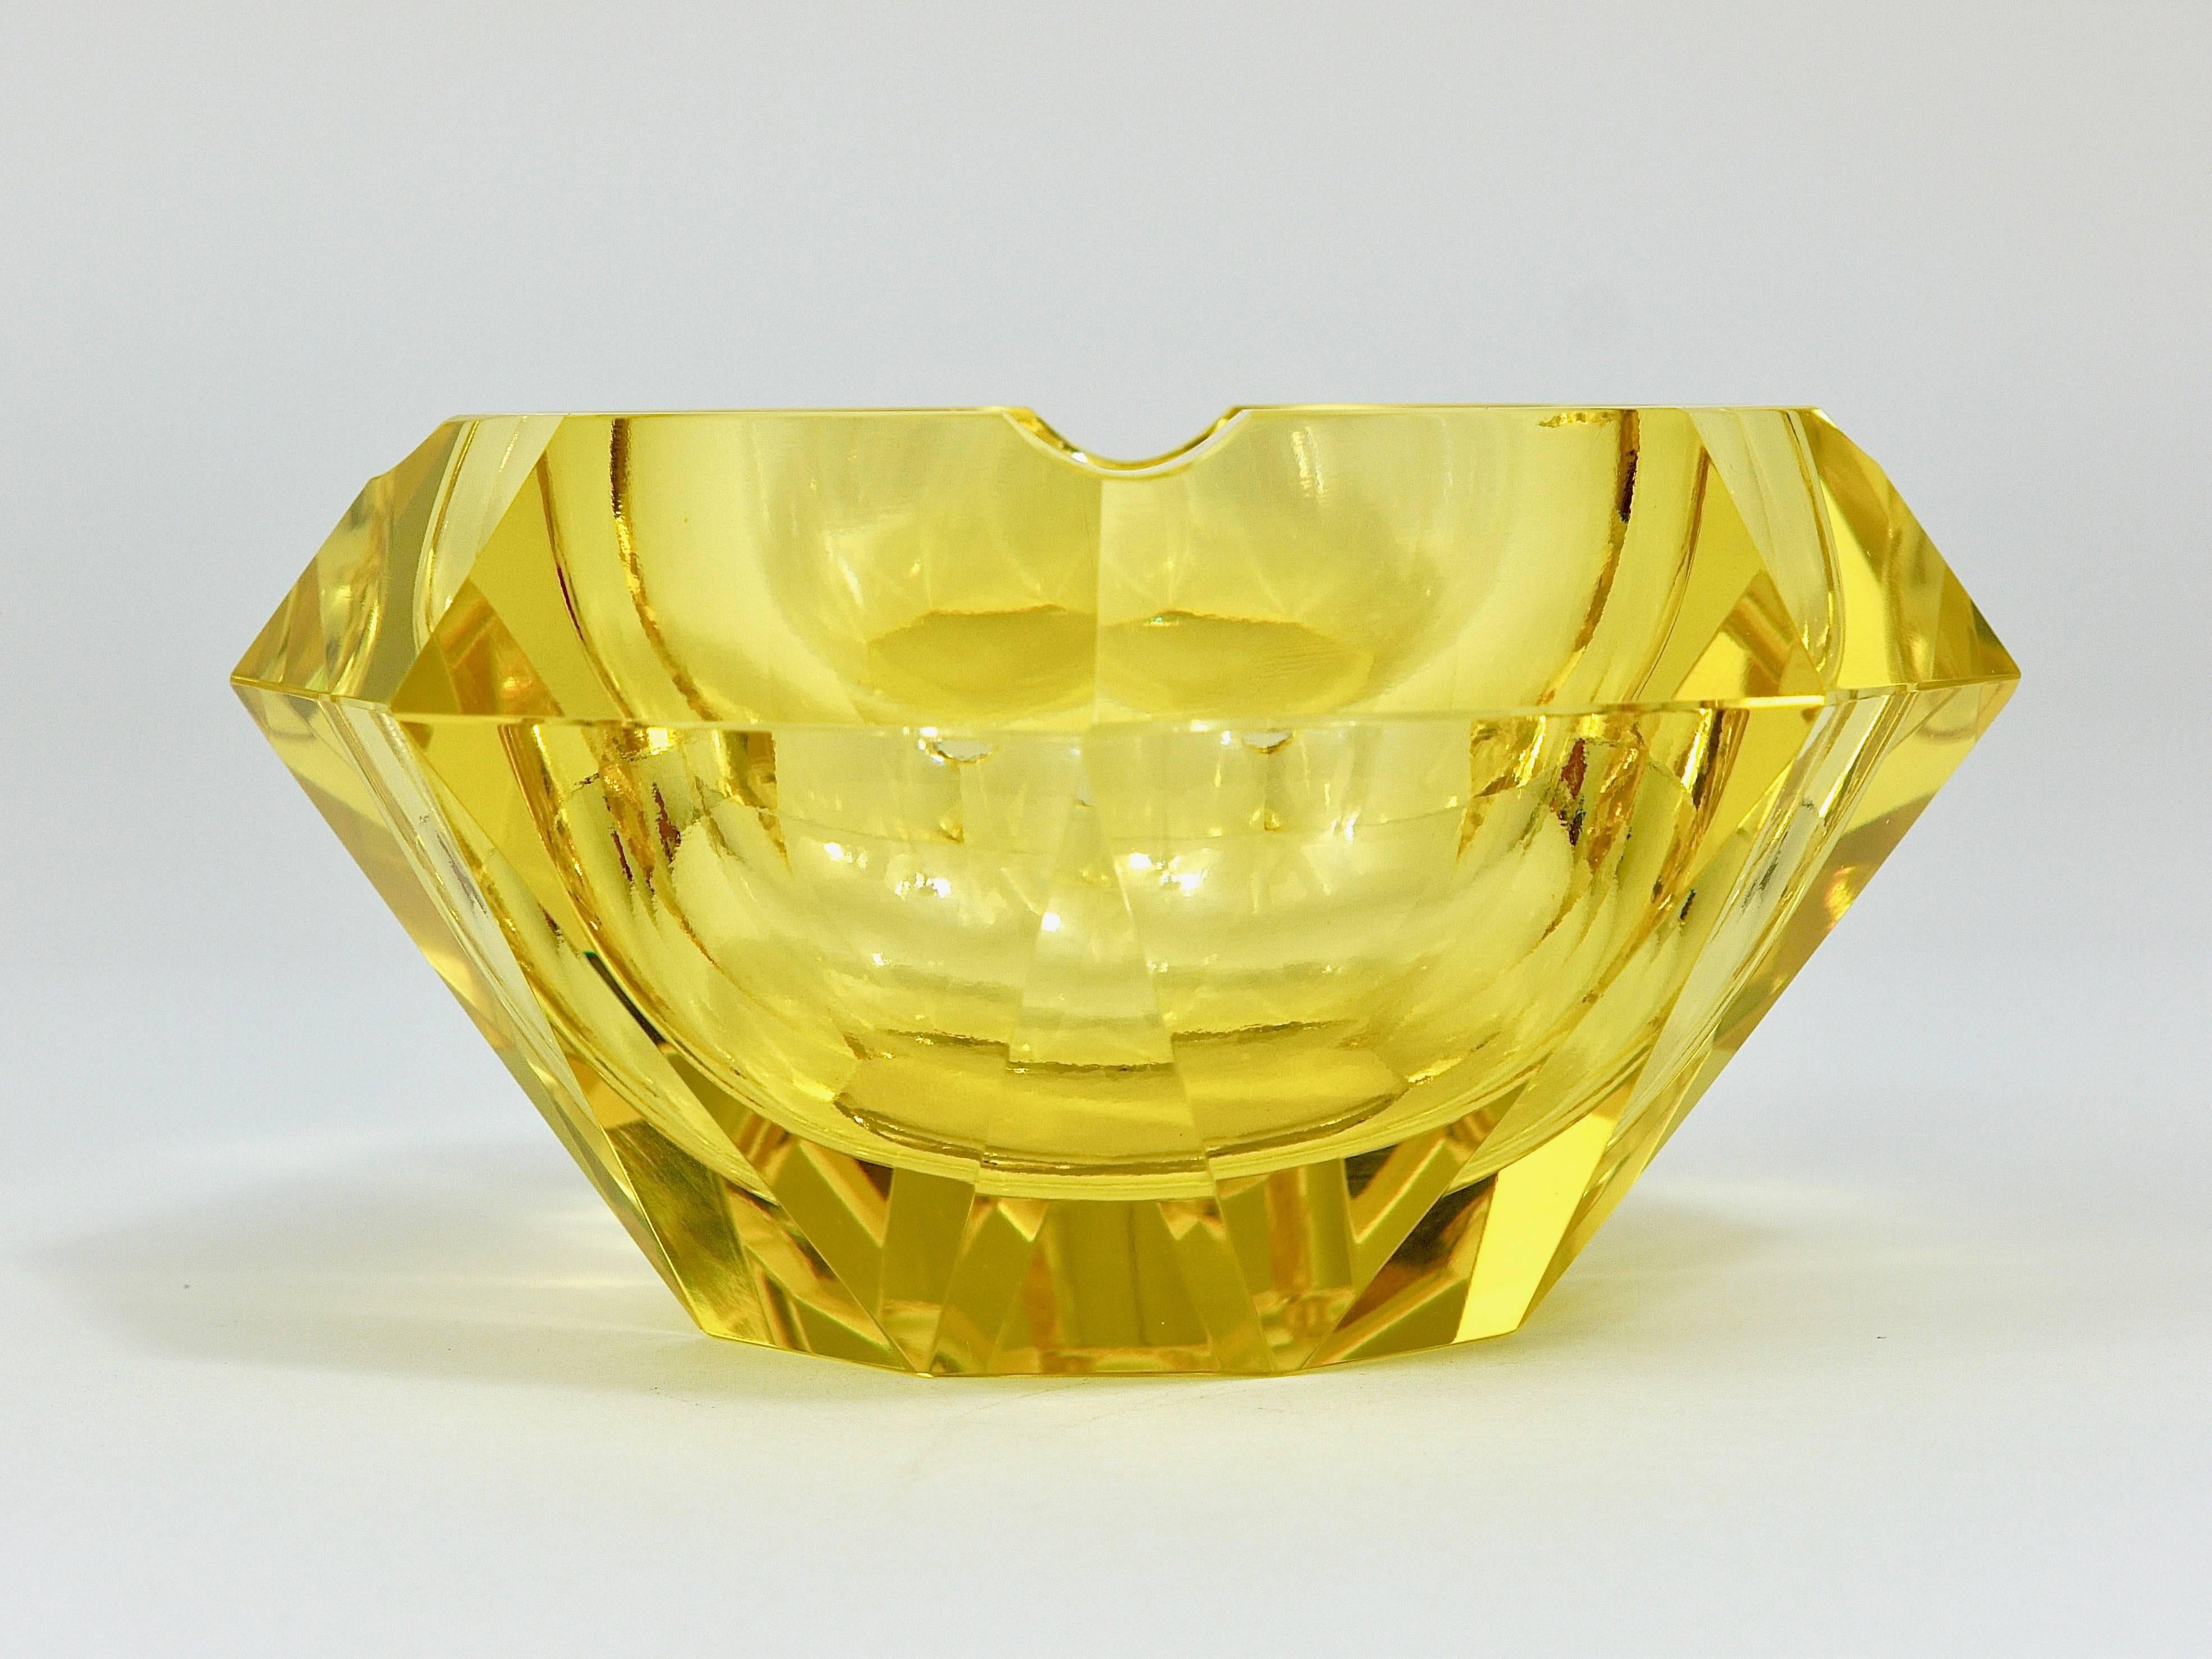 1930s Lemon Faceted Diamond Ashtray in Excellent Condition, Murano, Italy 1